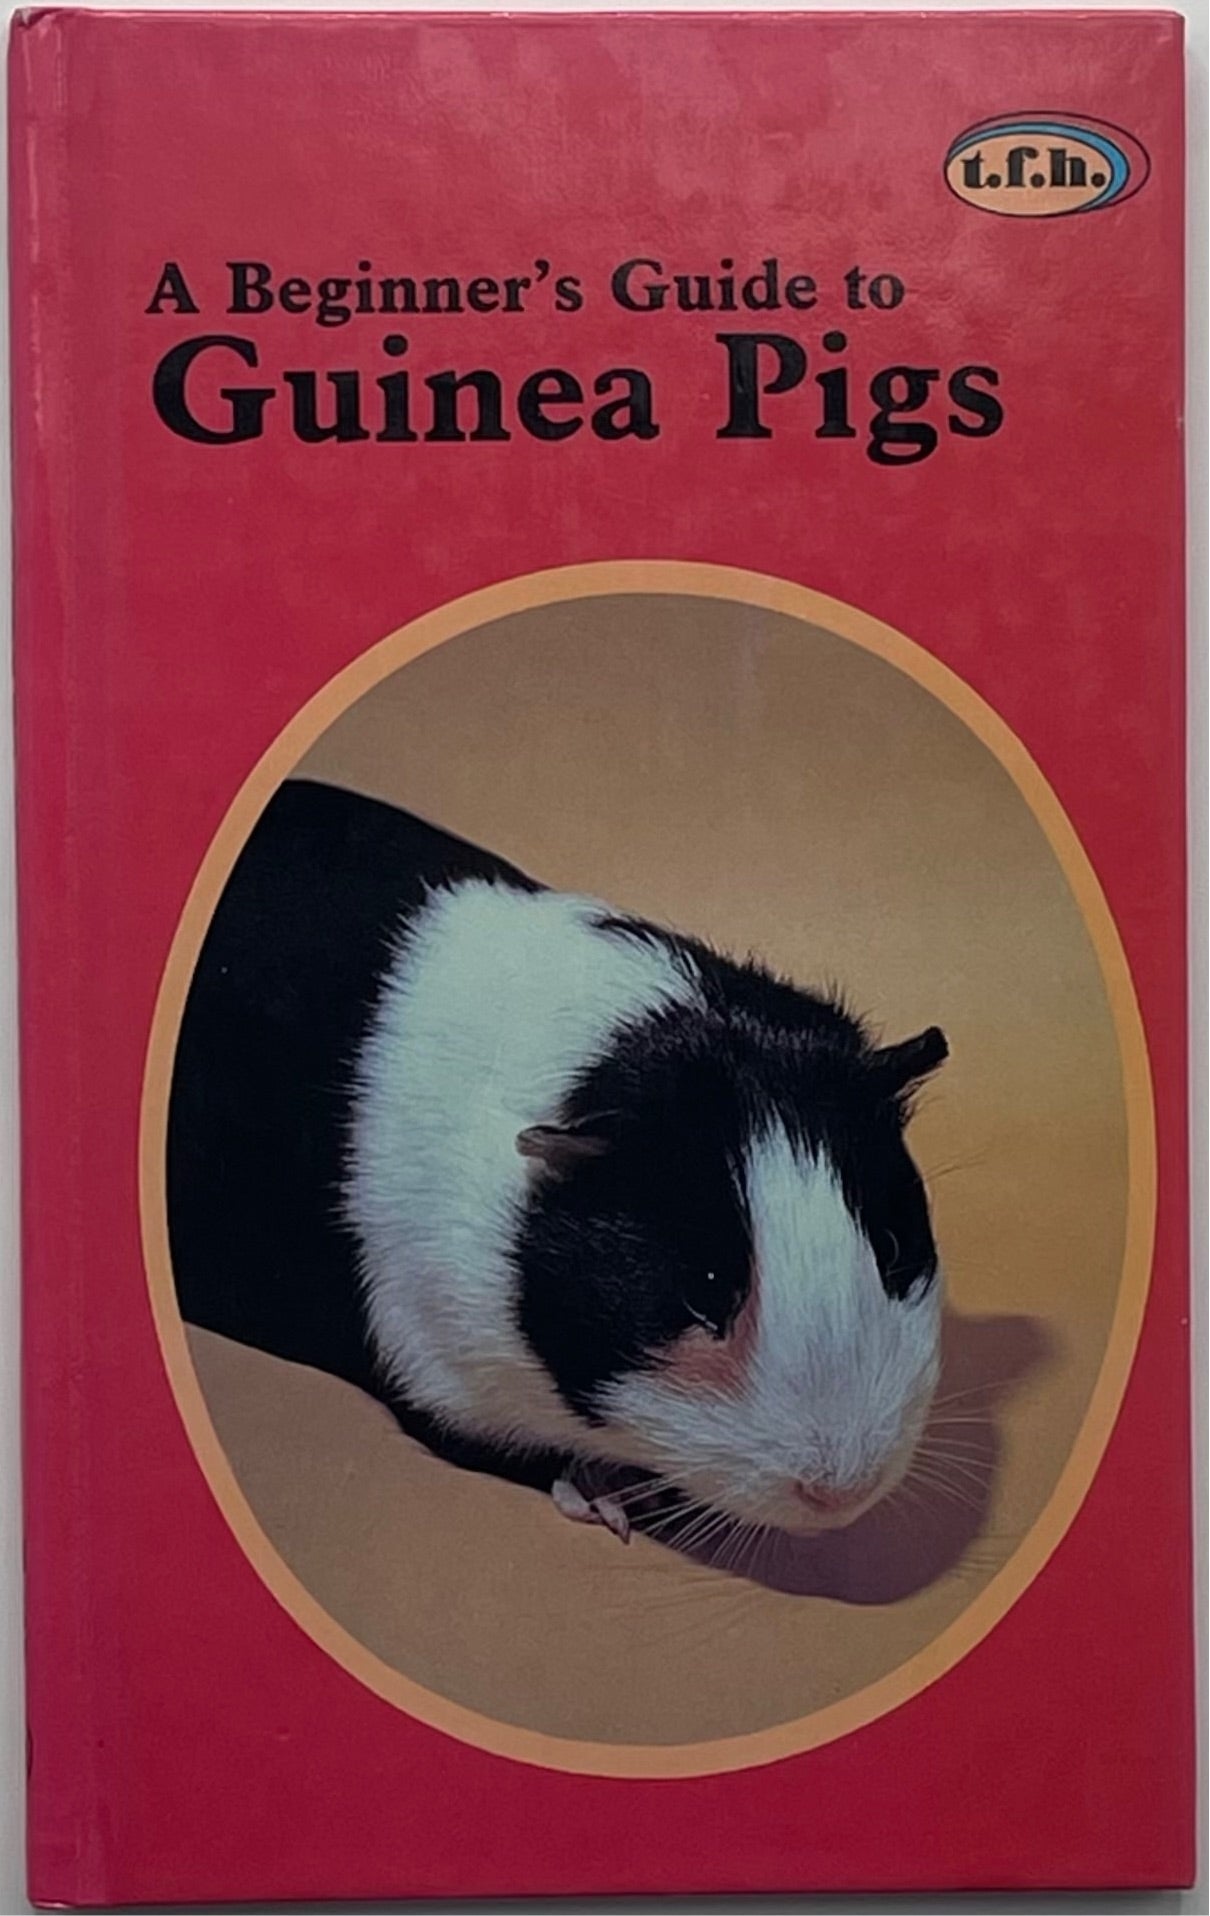 A Beginner’s Guide to Guinea Pigs, Tom Willkie